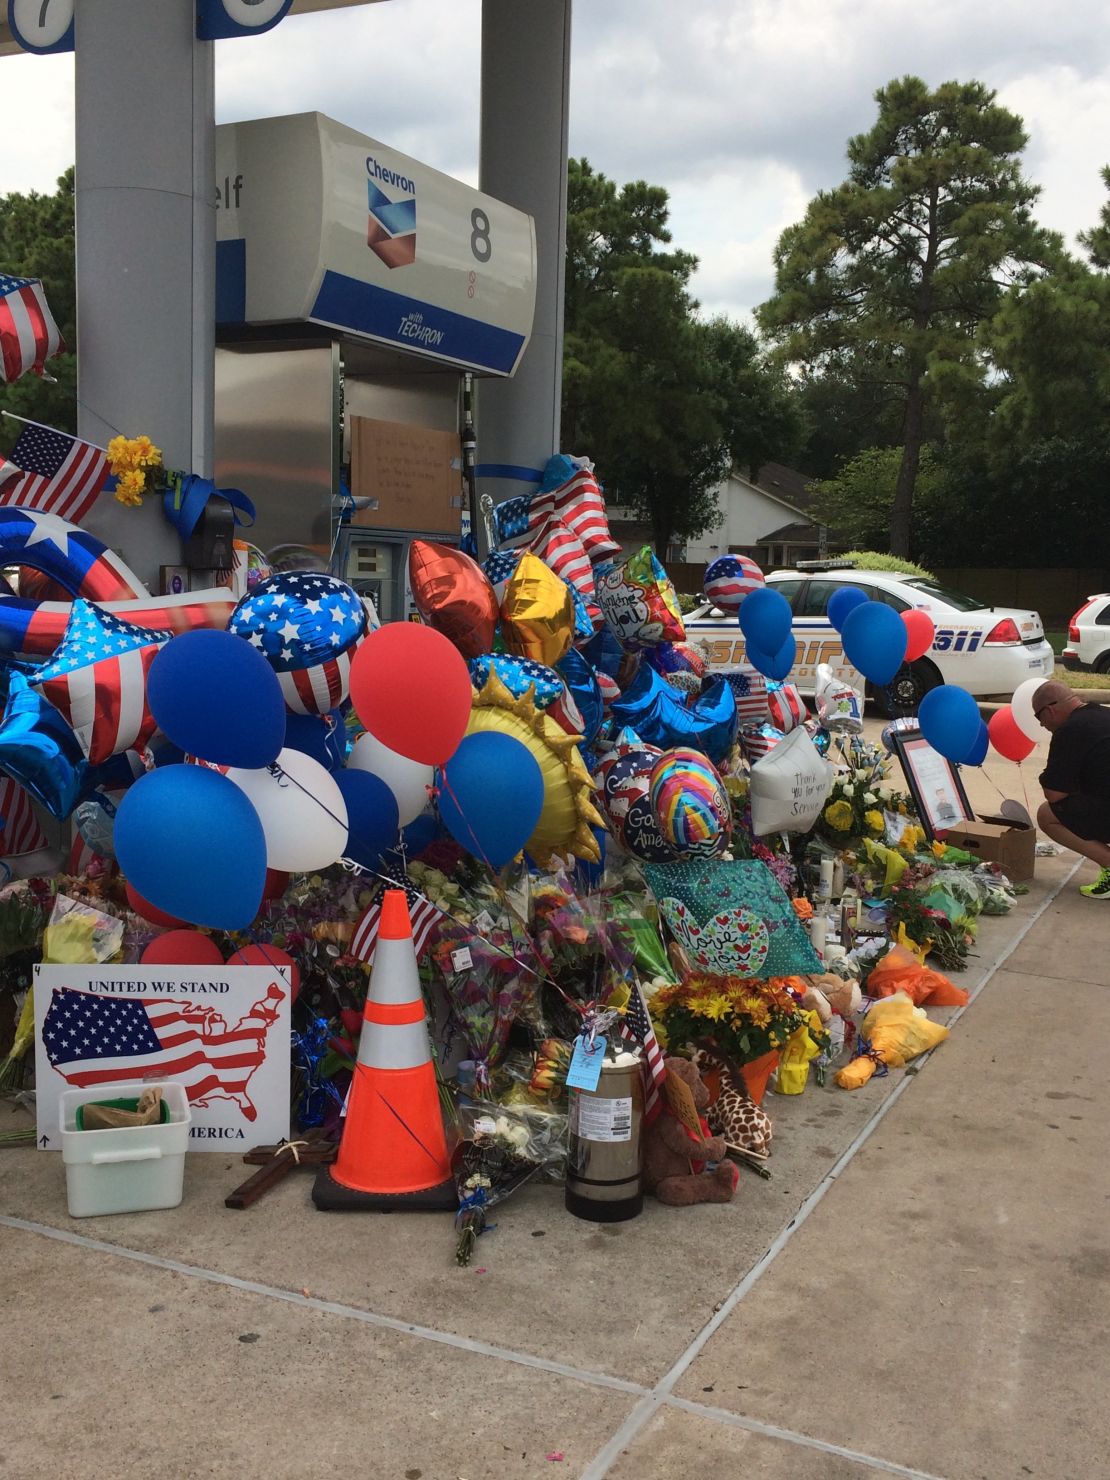 Mourners created a memorial at the gas station where Goforth was killed.